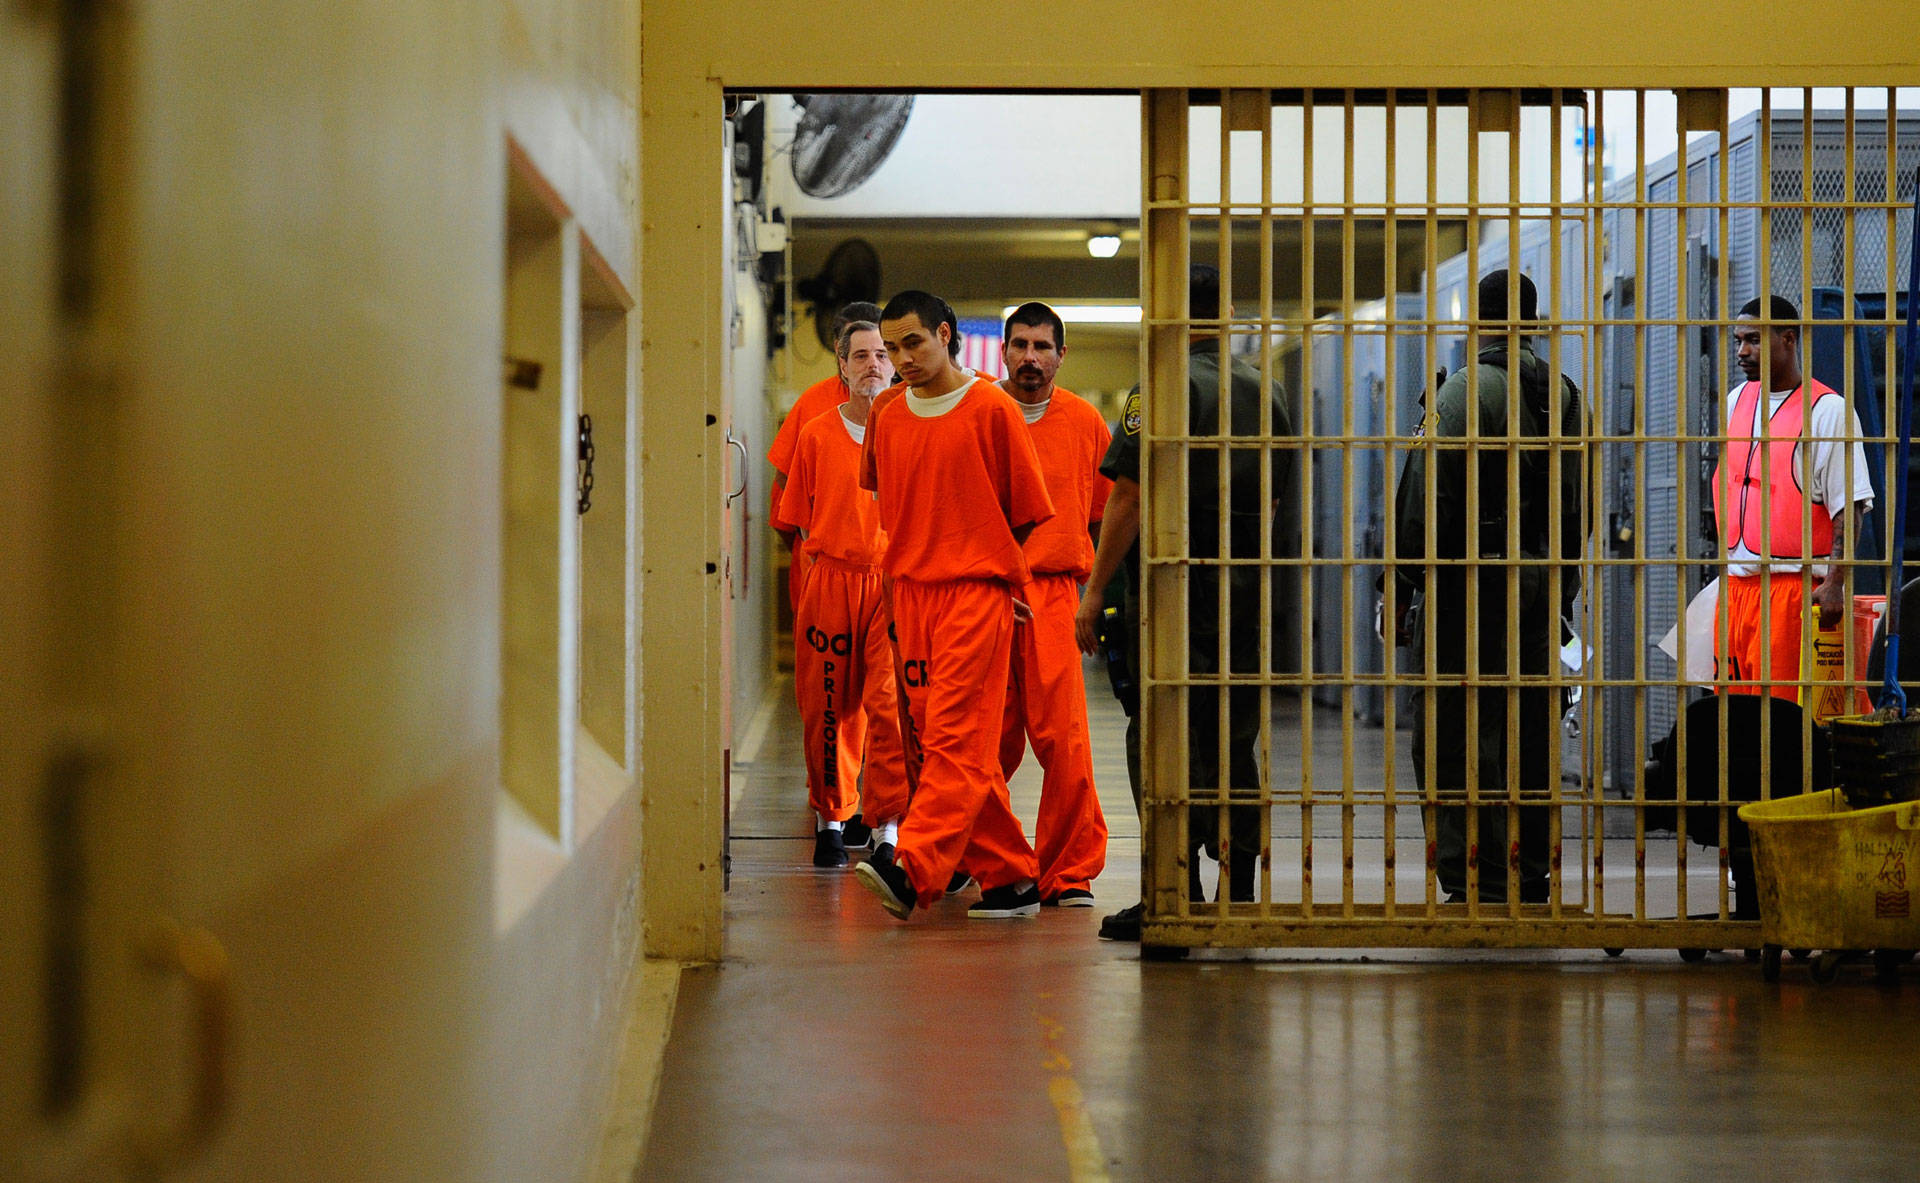 Inmates at Chino State Prison walk the hallway in 2010. Kevork Djansezian/Getty Images